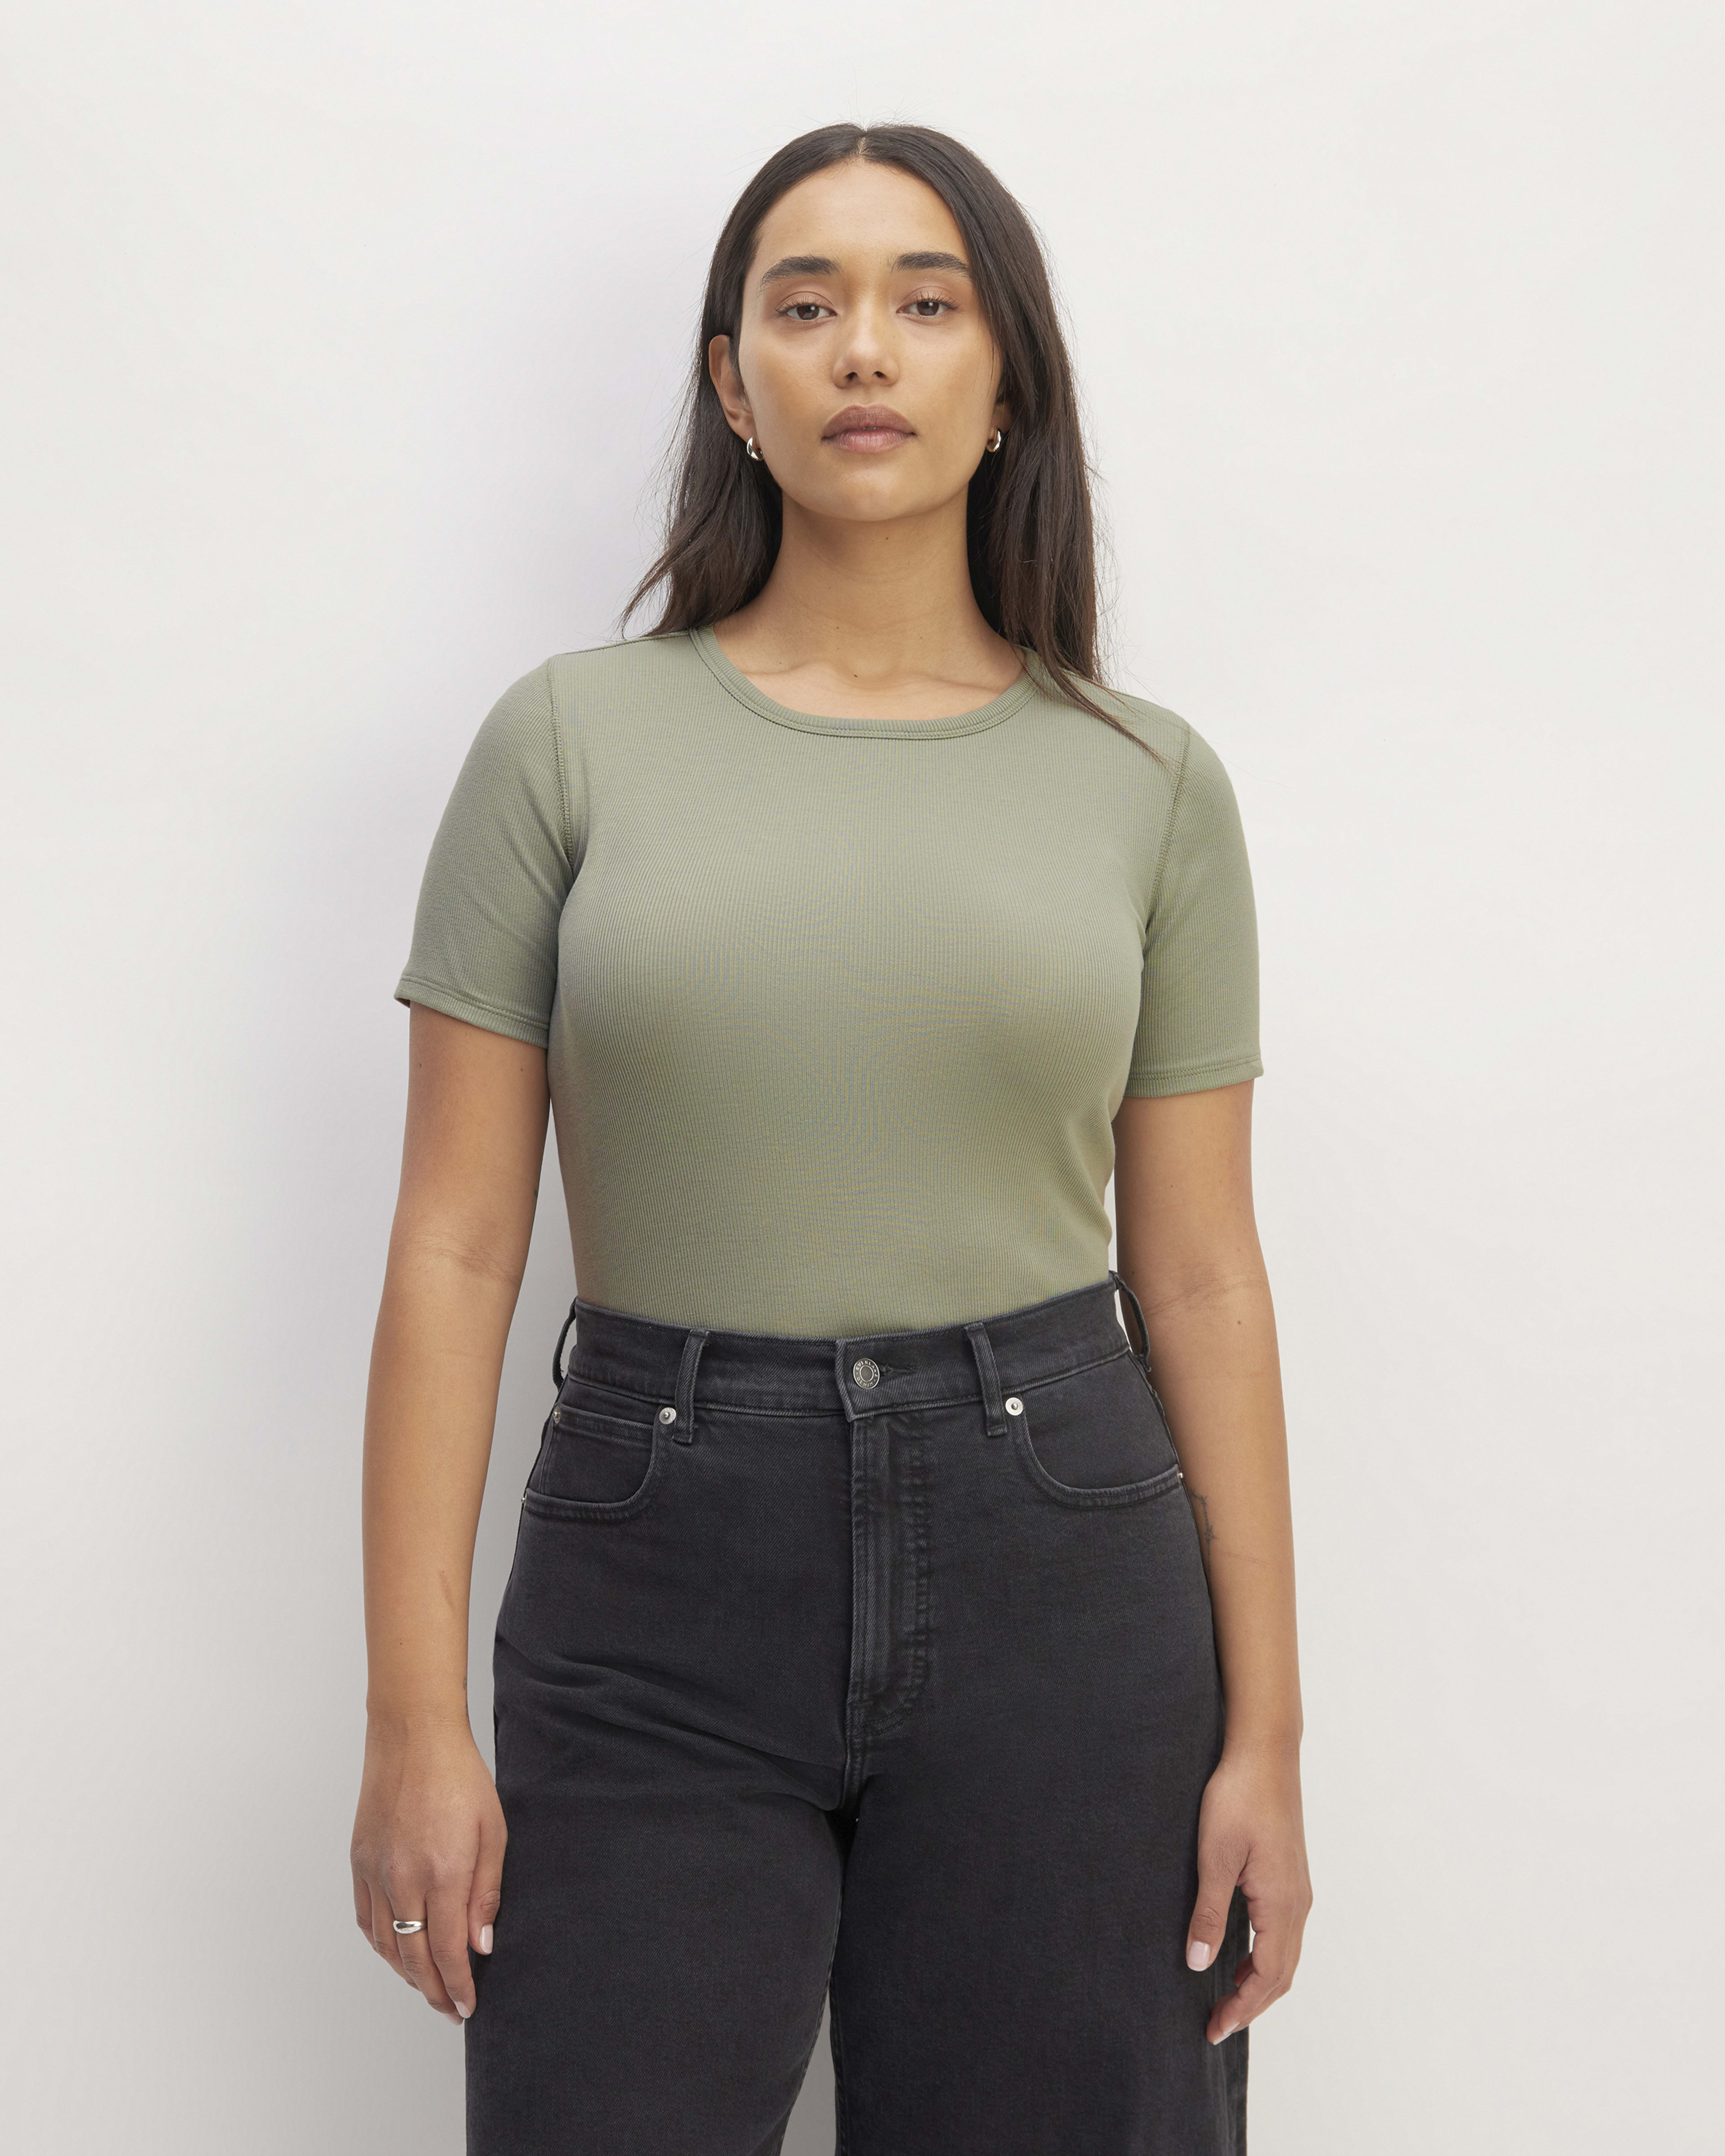 Everlane Dark Green Perform Shelf Bra Tank Top size XS Dri Fit Workout Top  NWT - $22 New With Tags - From Marilyn